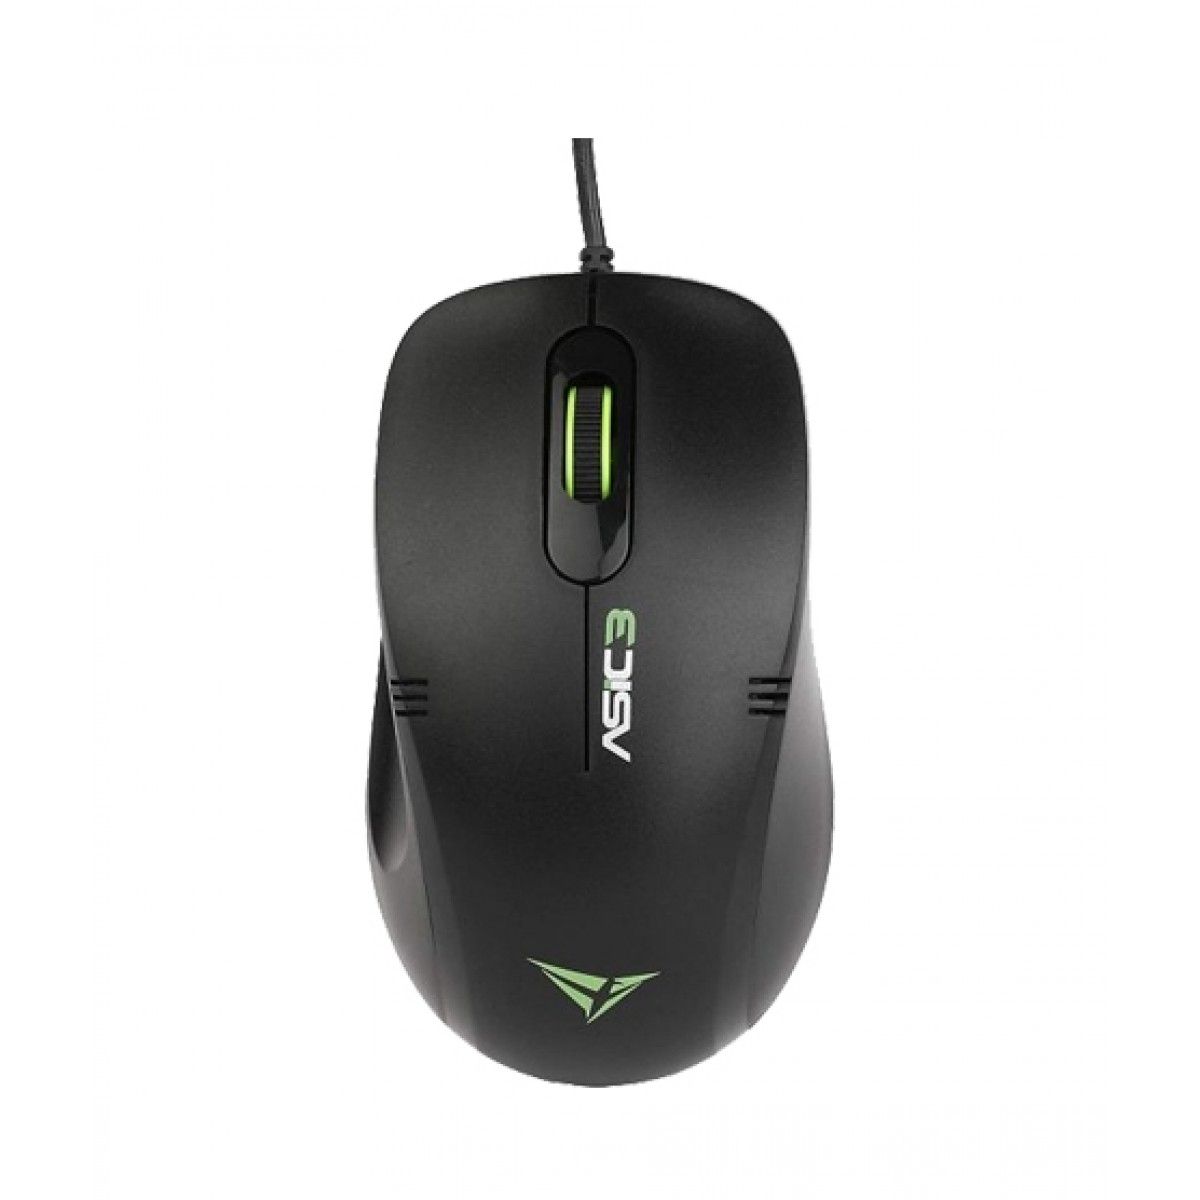 Alcatroz Asic 3 High Resolution Optical Mouse